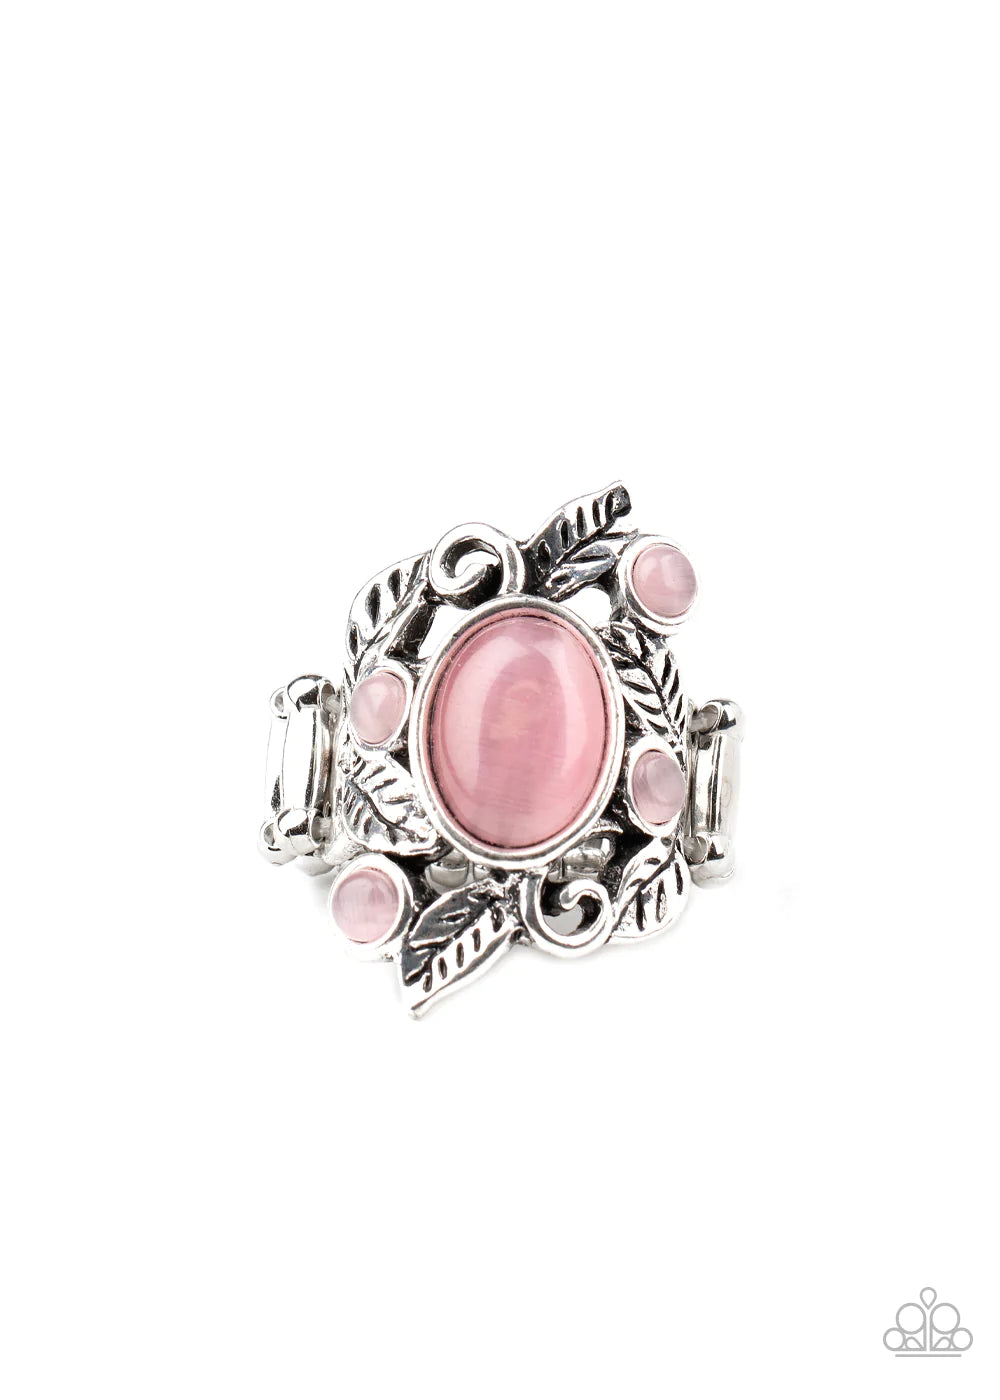 Paparazzi Ring - Tropical Dream - Pink